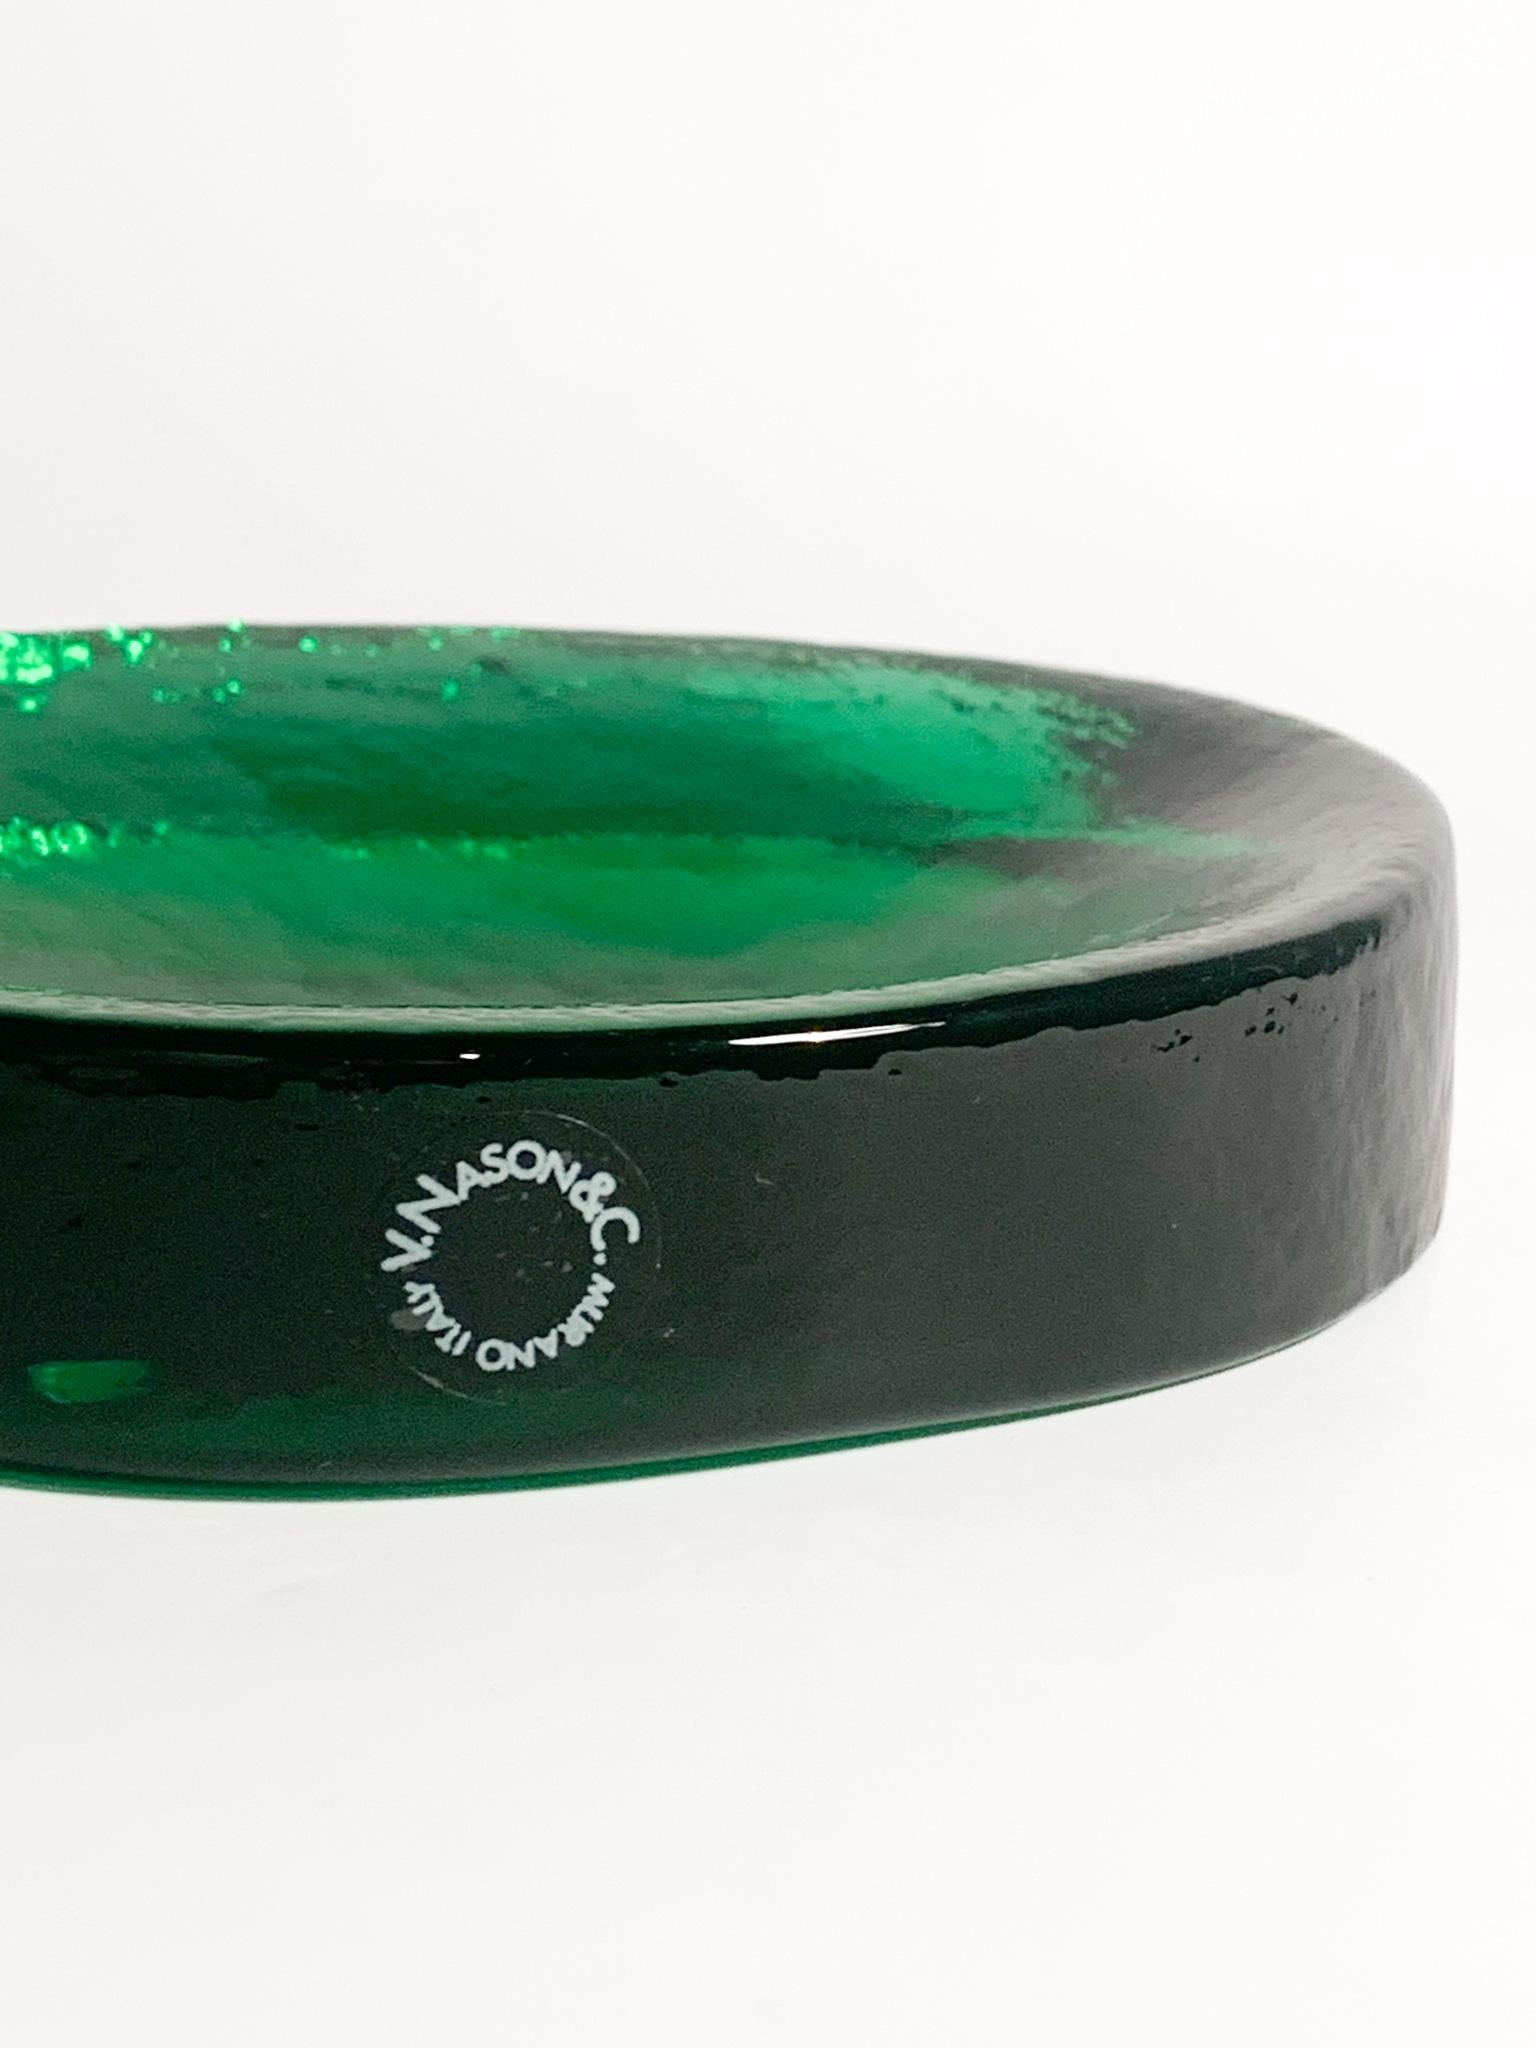 Green Murano Glass Bowl by Nason from the 1980s 1